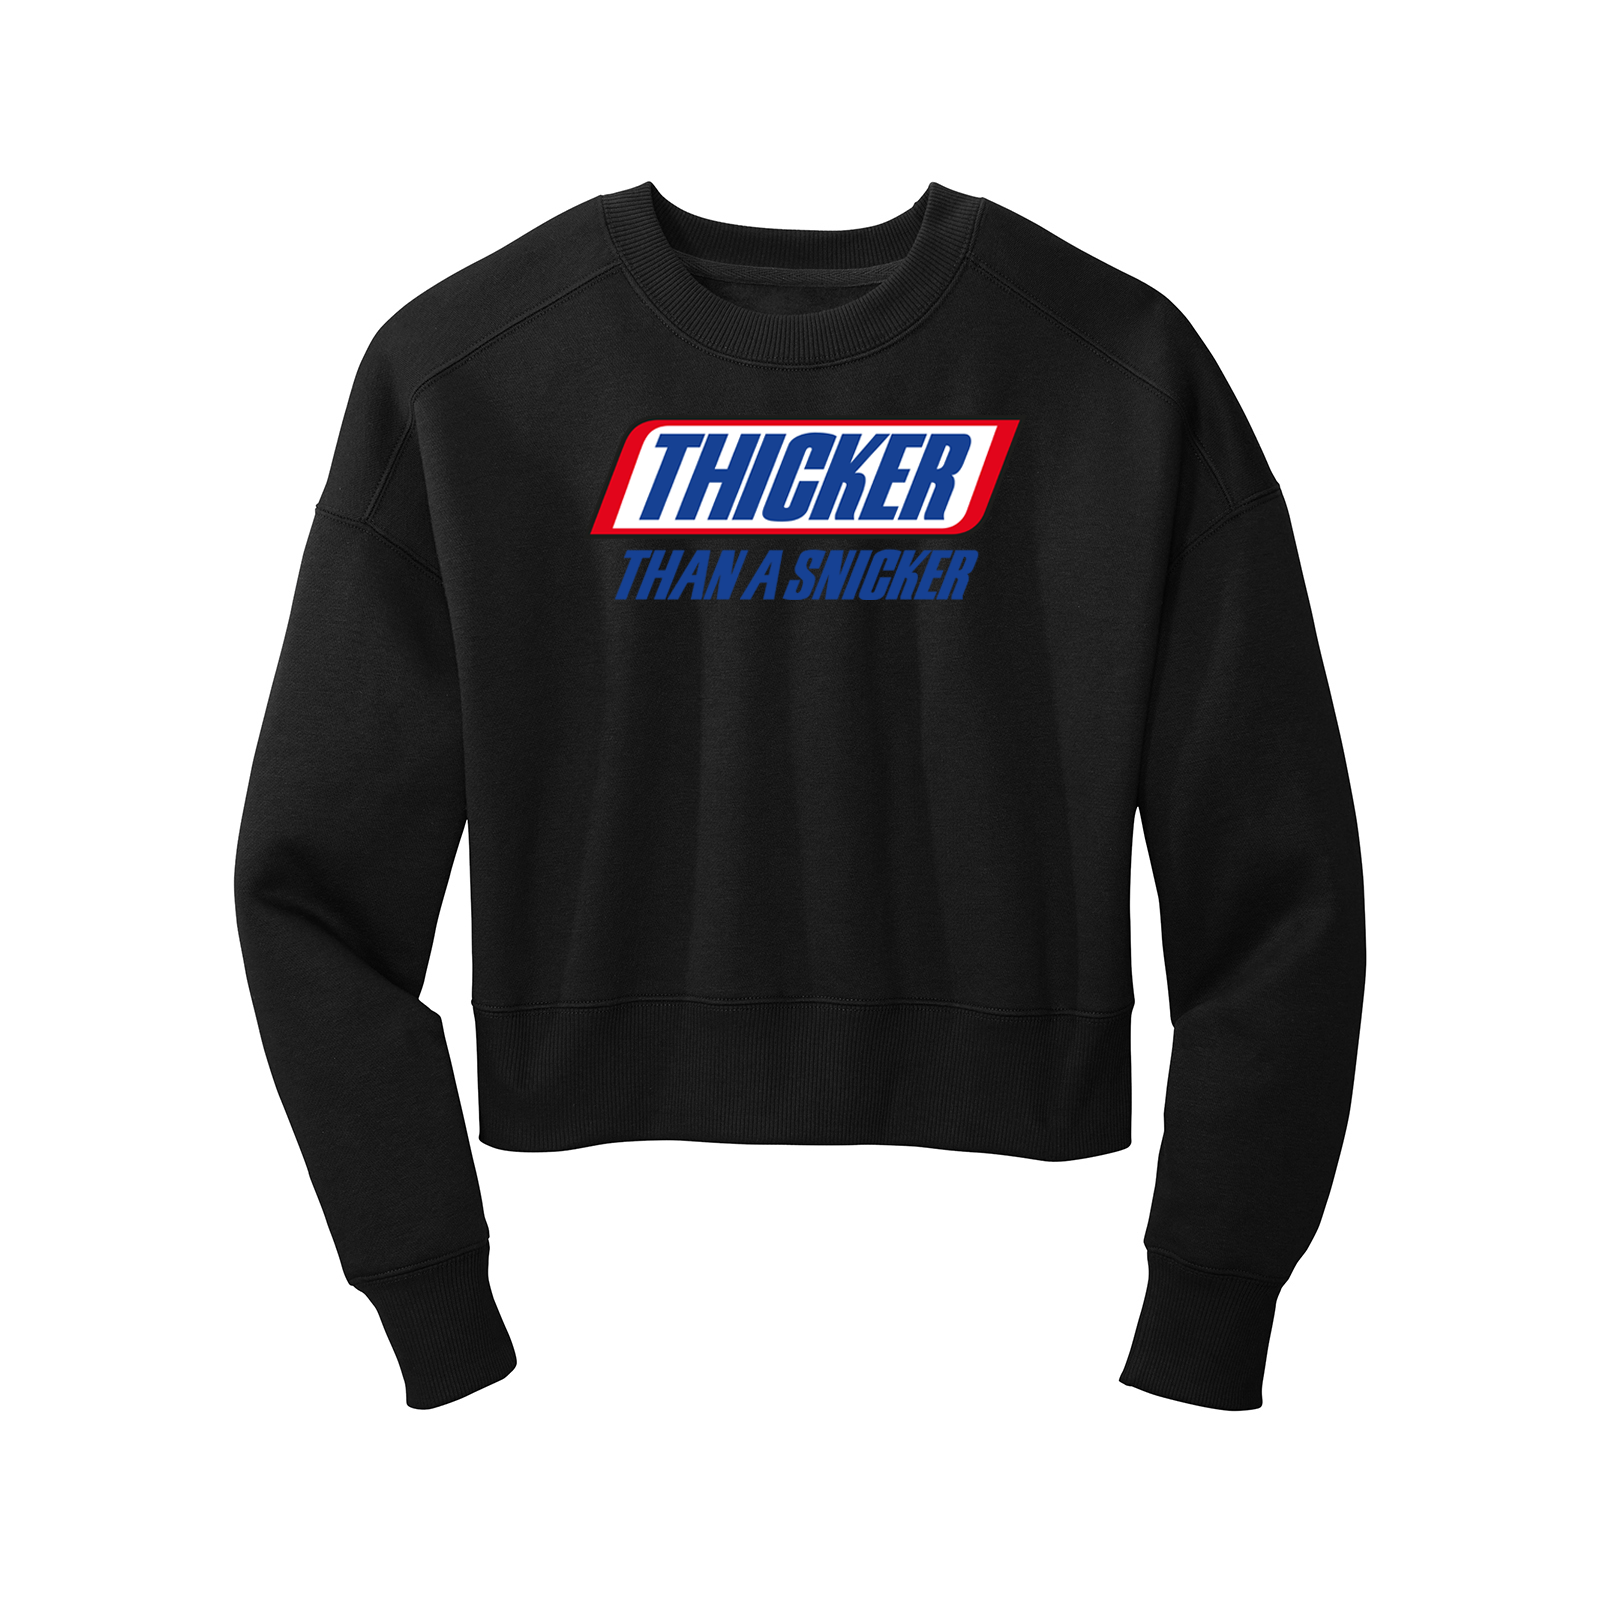 'Thicker Than A Snicker' Long Sleeve Black Crop Top